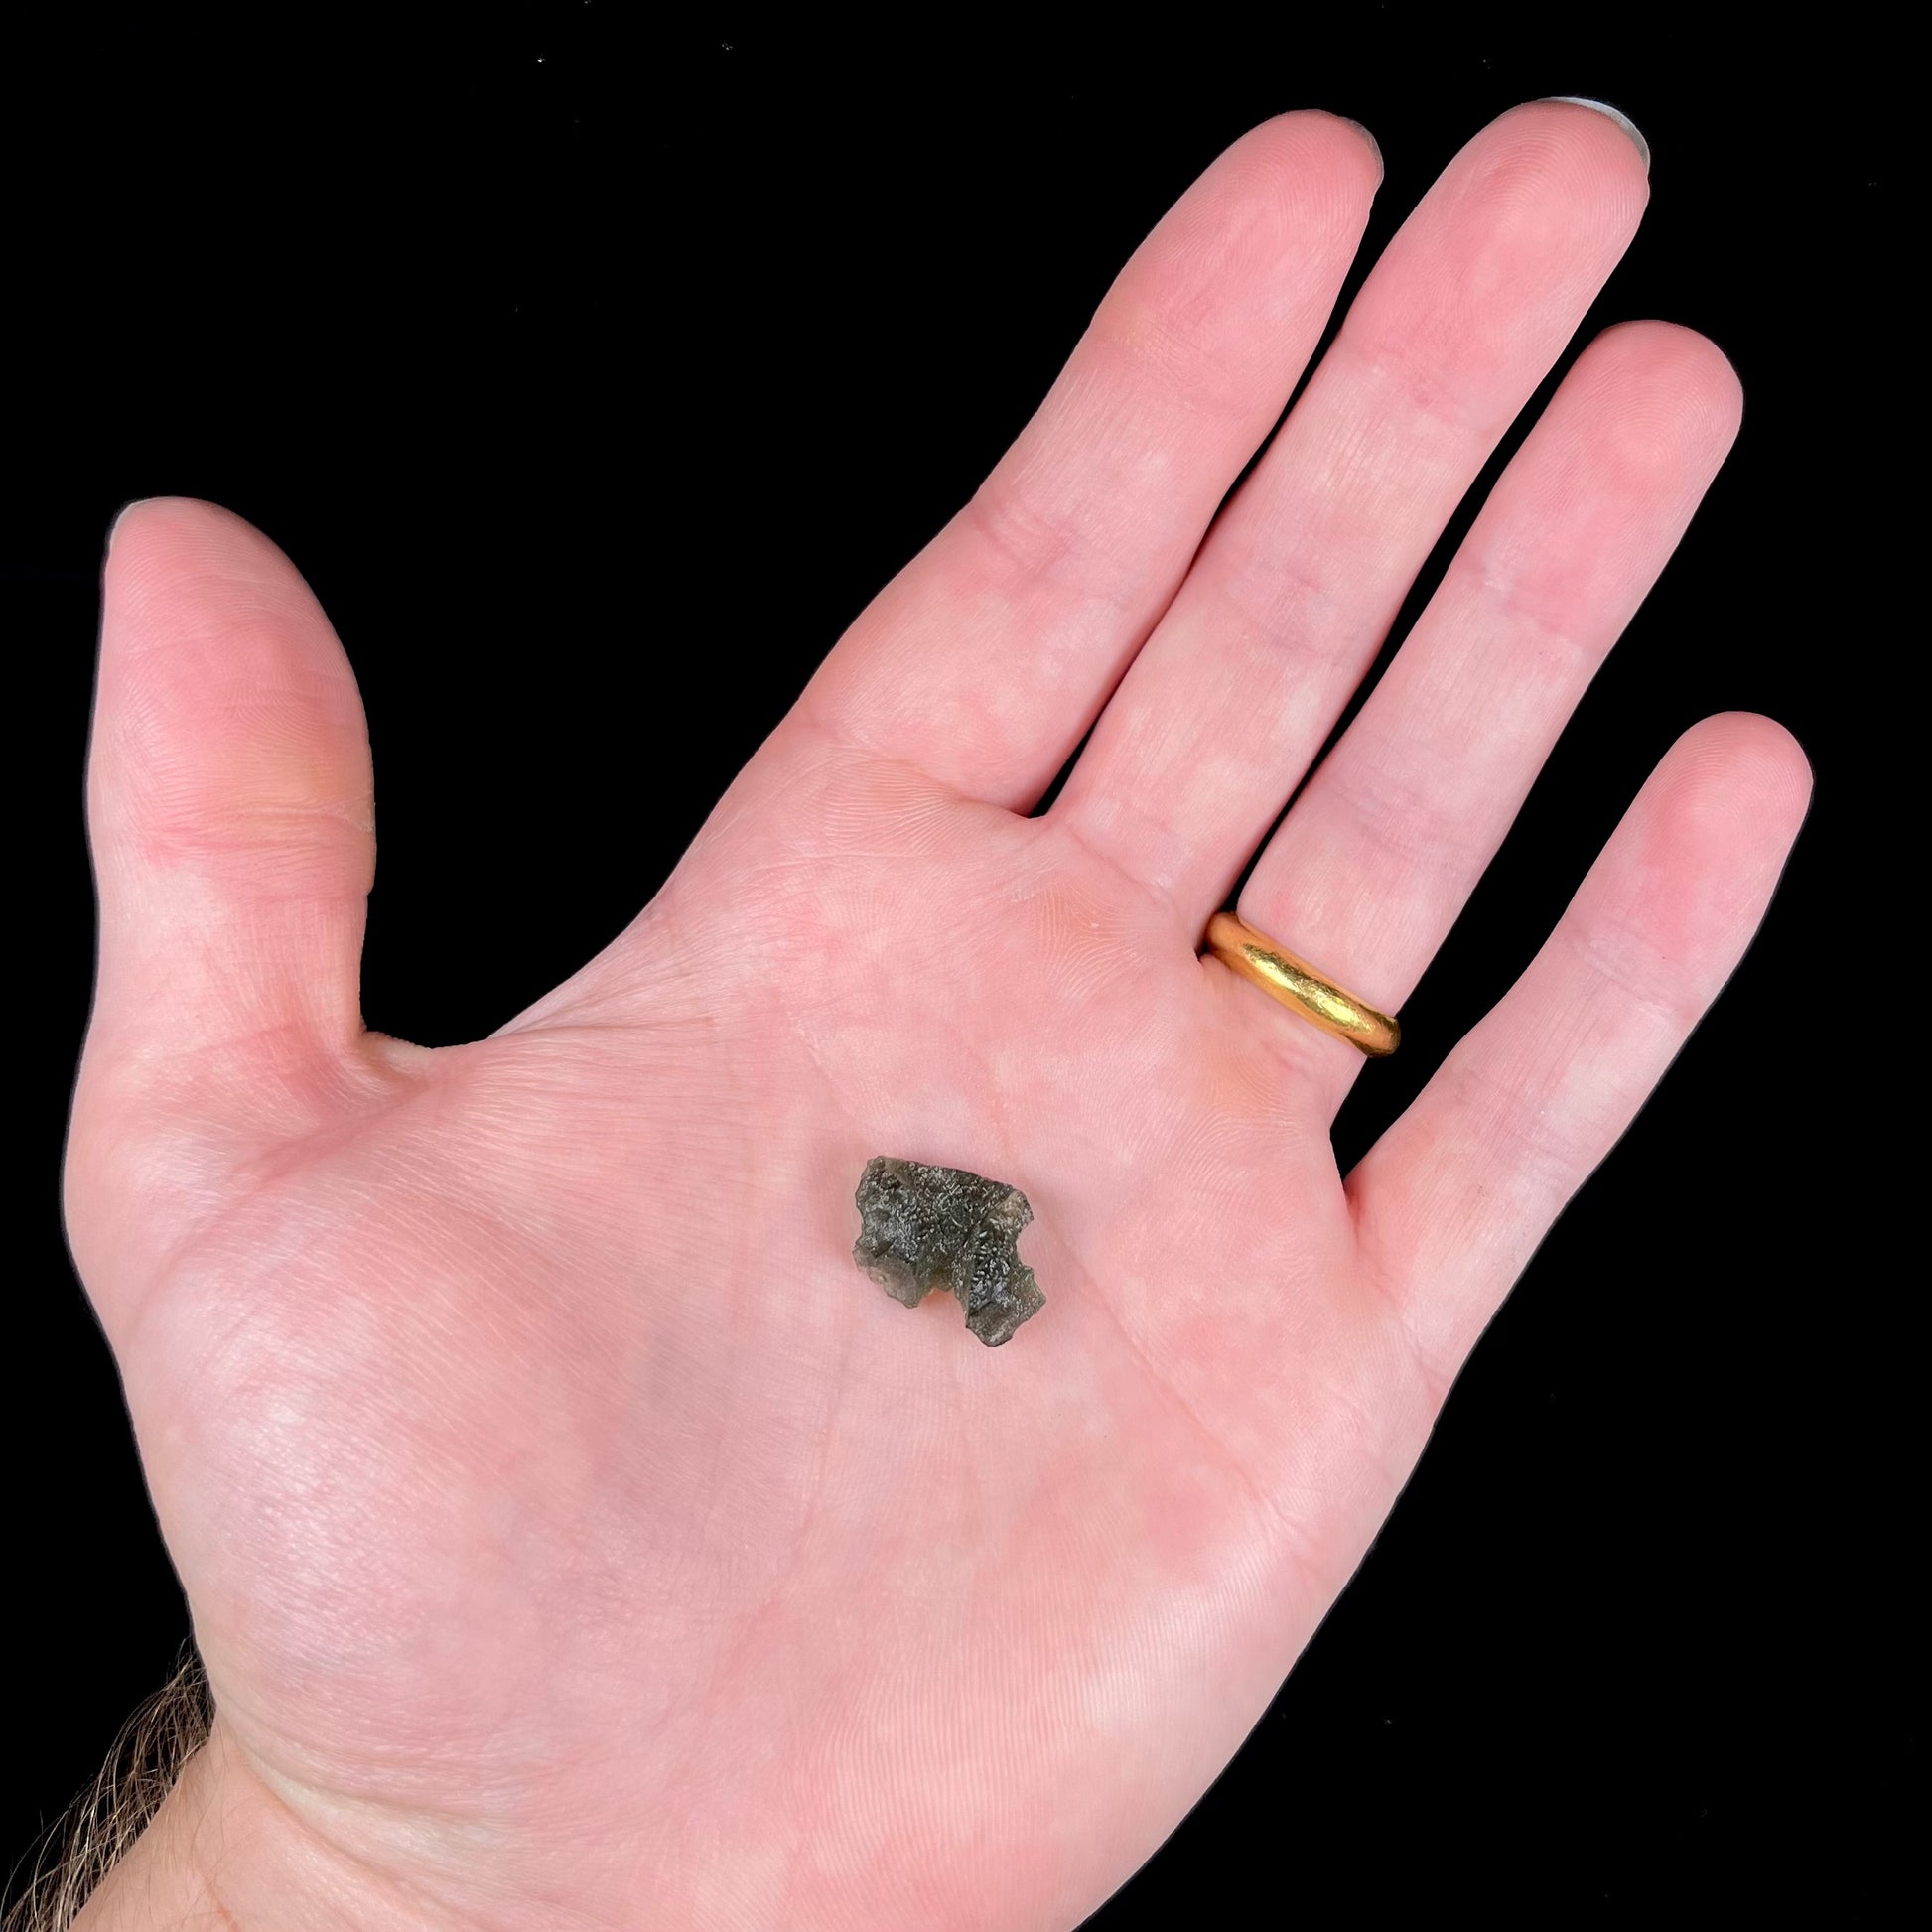 A natural, rough moldavite crystal.  The stone is green color and transluscent.